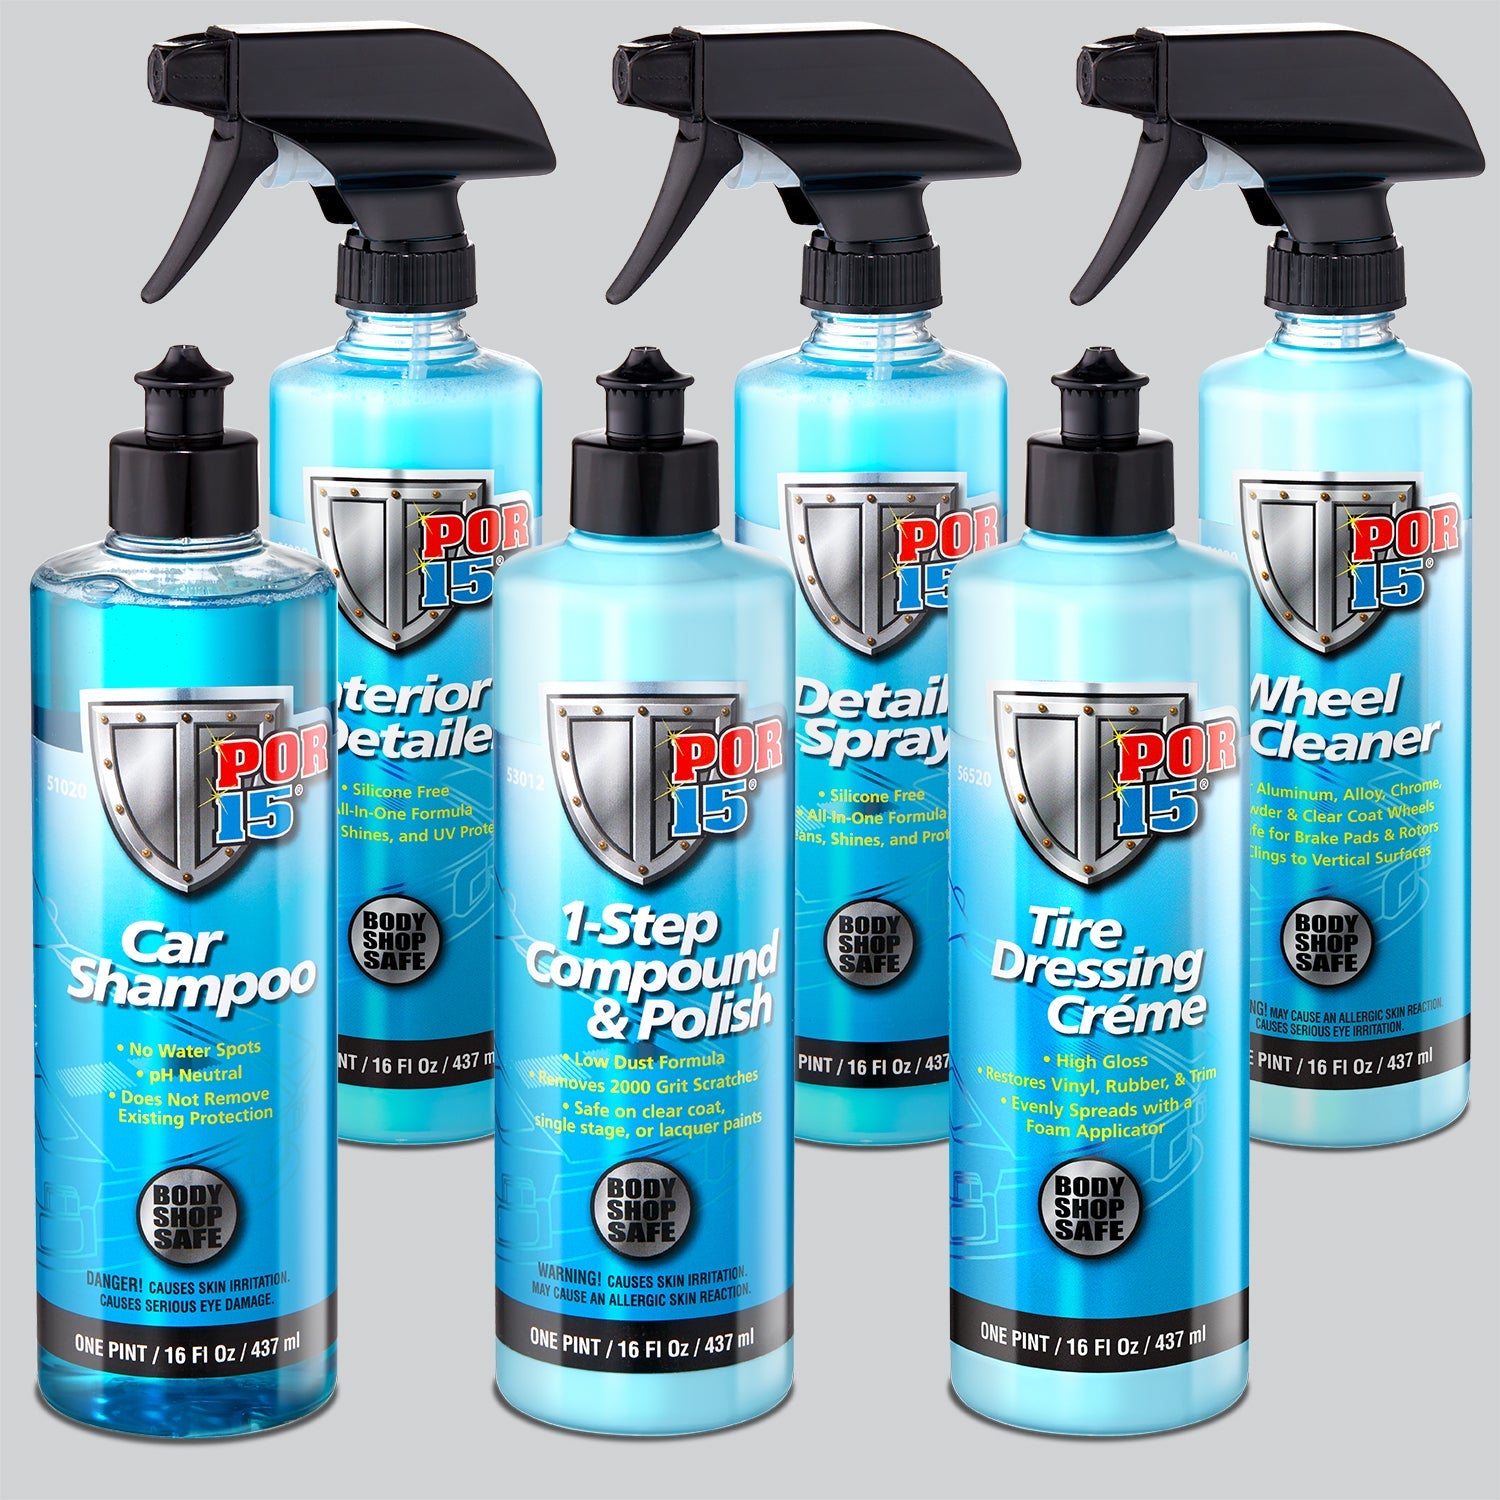 Brand new! Car Cleaning Gel, Car Cleaning Putty, Car Cleaning